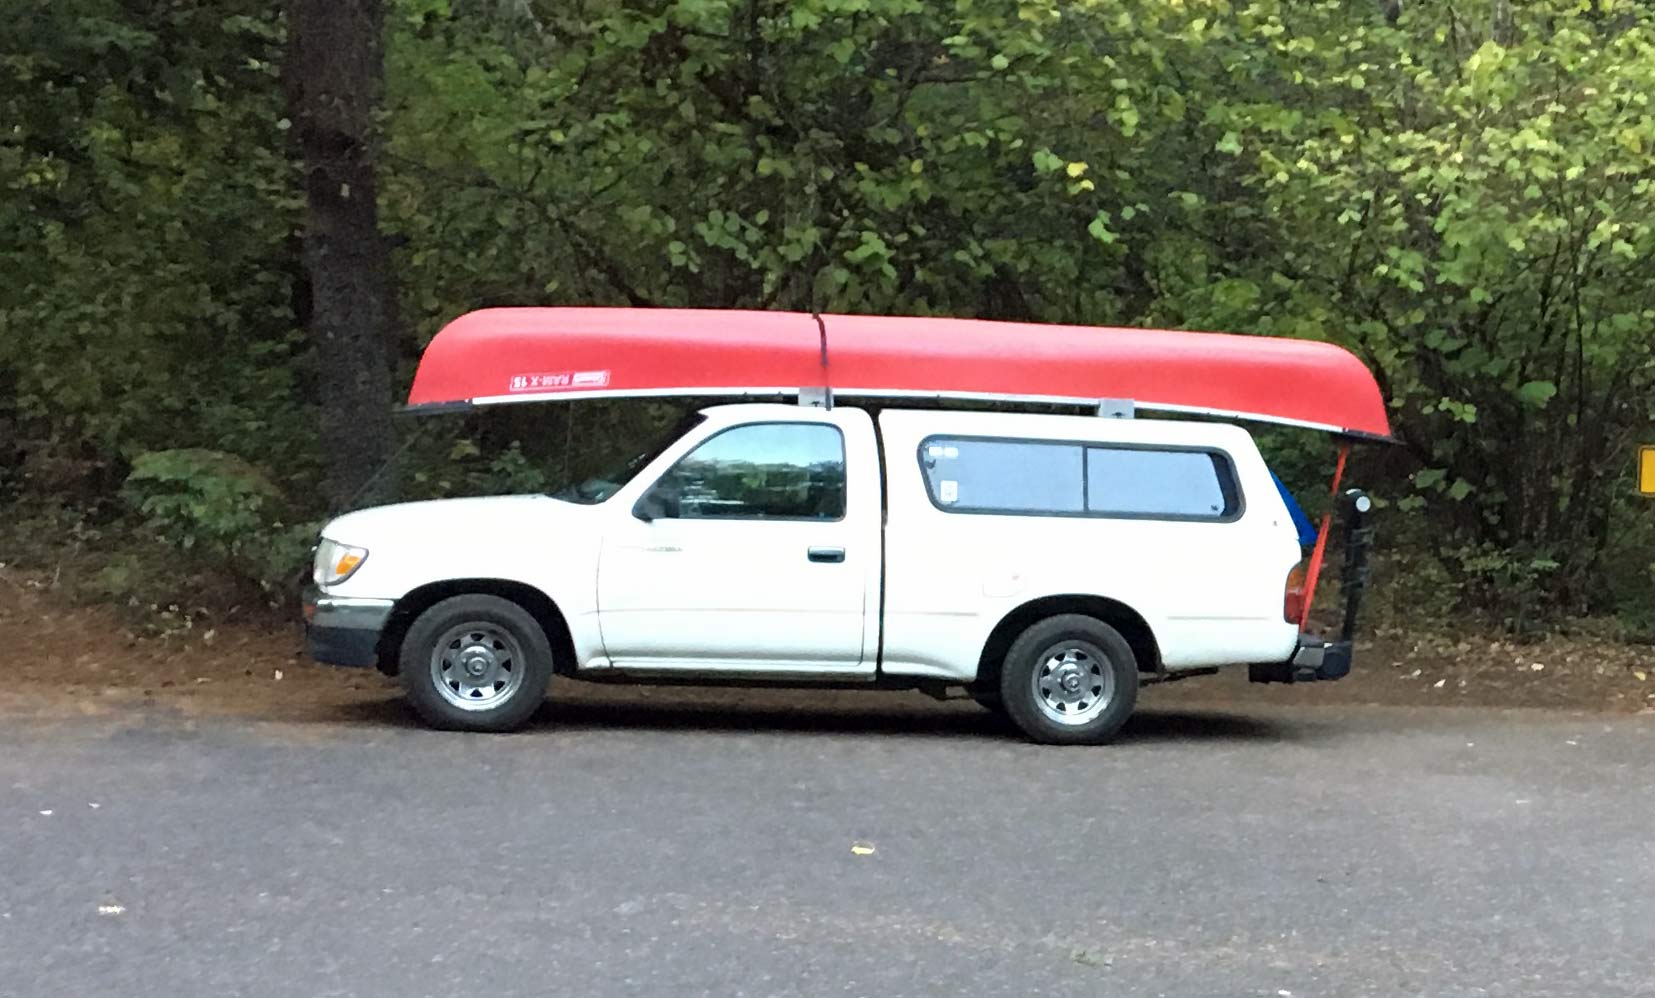 white Toyota truck with a red canoe on top